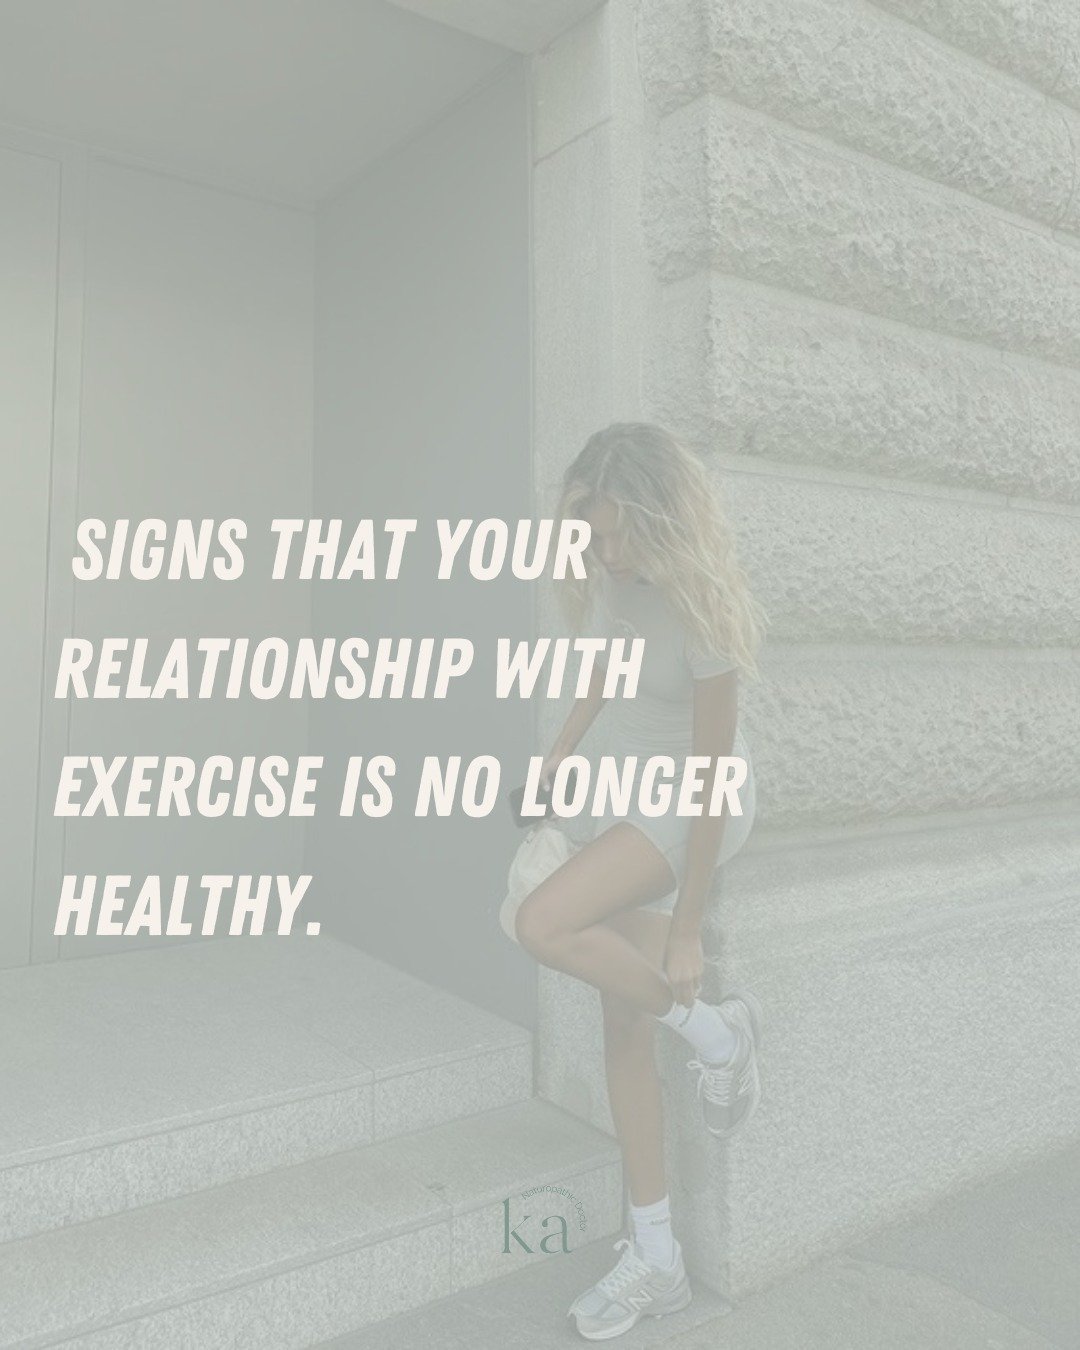 Exercise is good for you, right? 👇🏼⁠
⁠
It's rarely talked about, but exercise obsession can become unhealthy, leading to undernourishment, mental health challenges, distorted body image, irregular periods and bone loss. ⁠
⁠
If you can relate to the